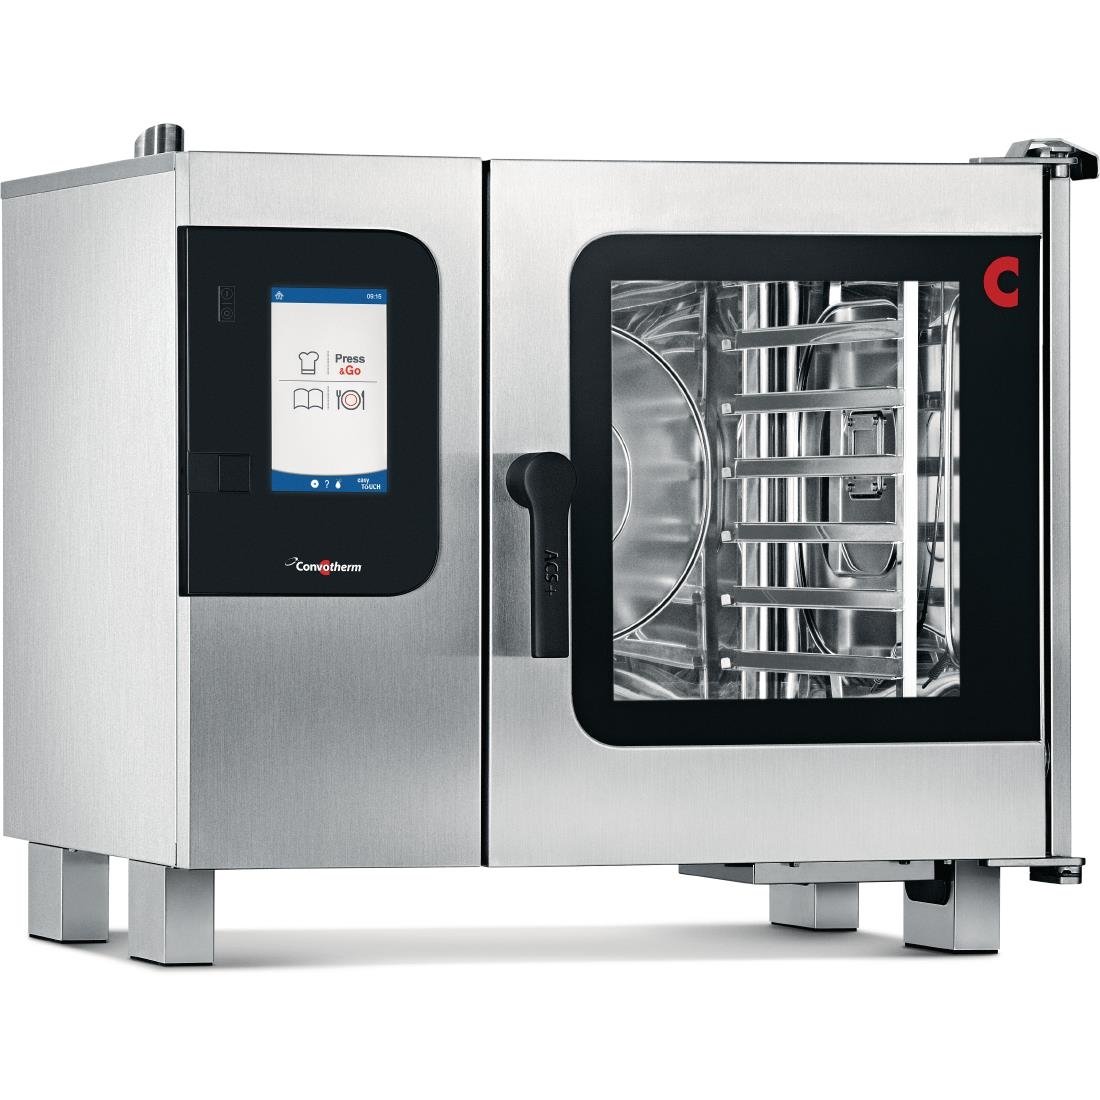 HC255-MO Convotherm 4 easyTouch Combi Oven 6 x 1 x1 GN Grid JD Catering Equipment Solutions Ltd